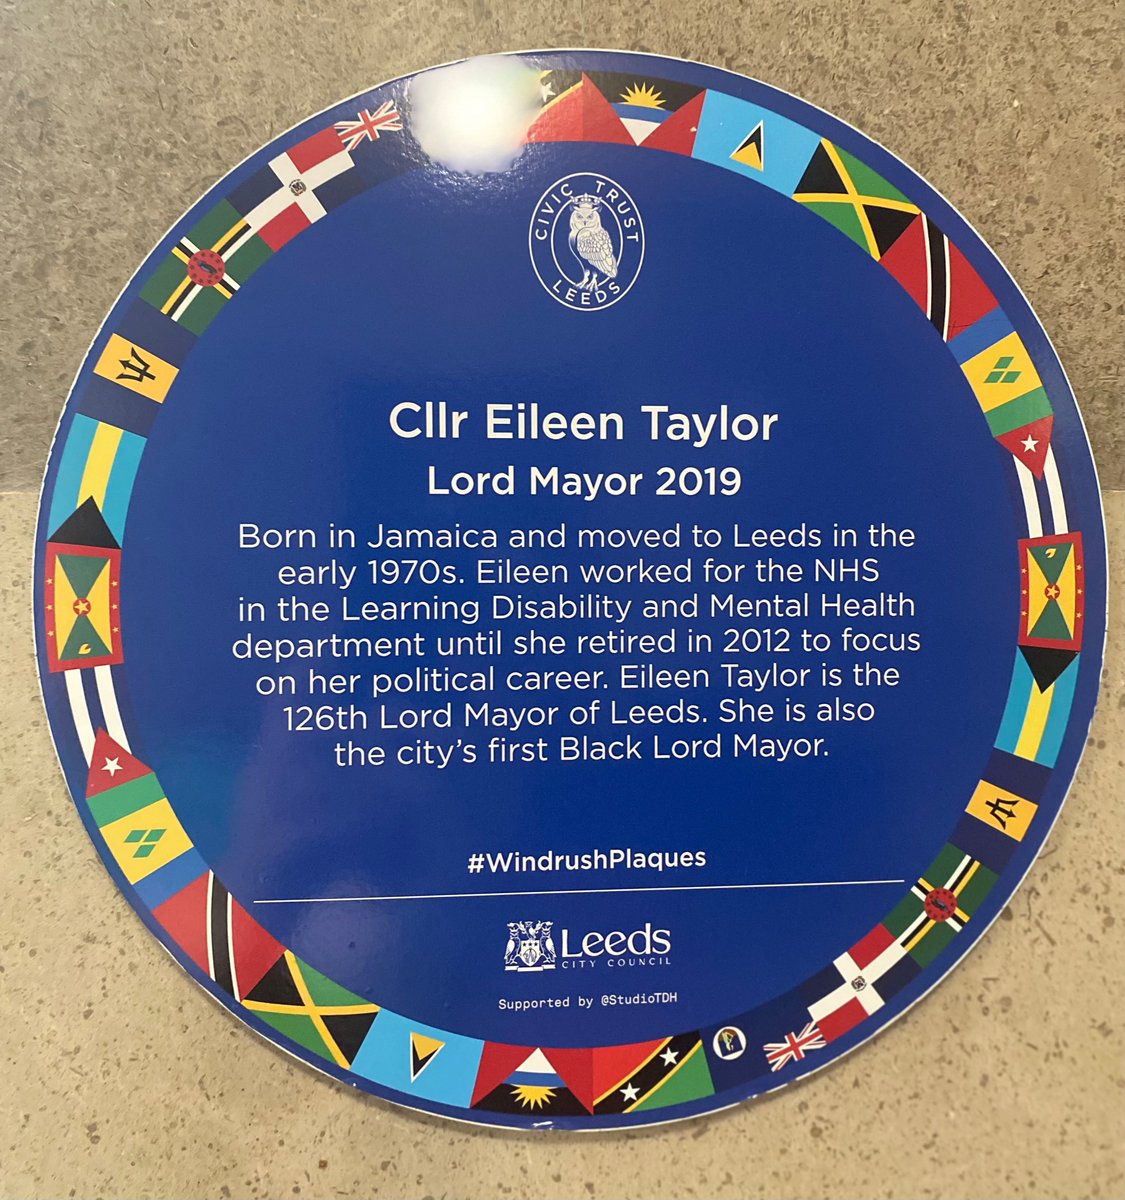 Passing Cllr Eileen Taylor’s #windrushplaque in #Leeds Civic Hall - back in 2019 this was the 1st plaque on the Windrush Plaque Trail created in conjunction with @LeedsCivicTrust